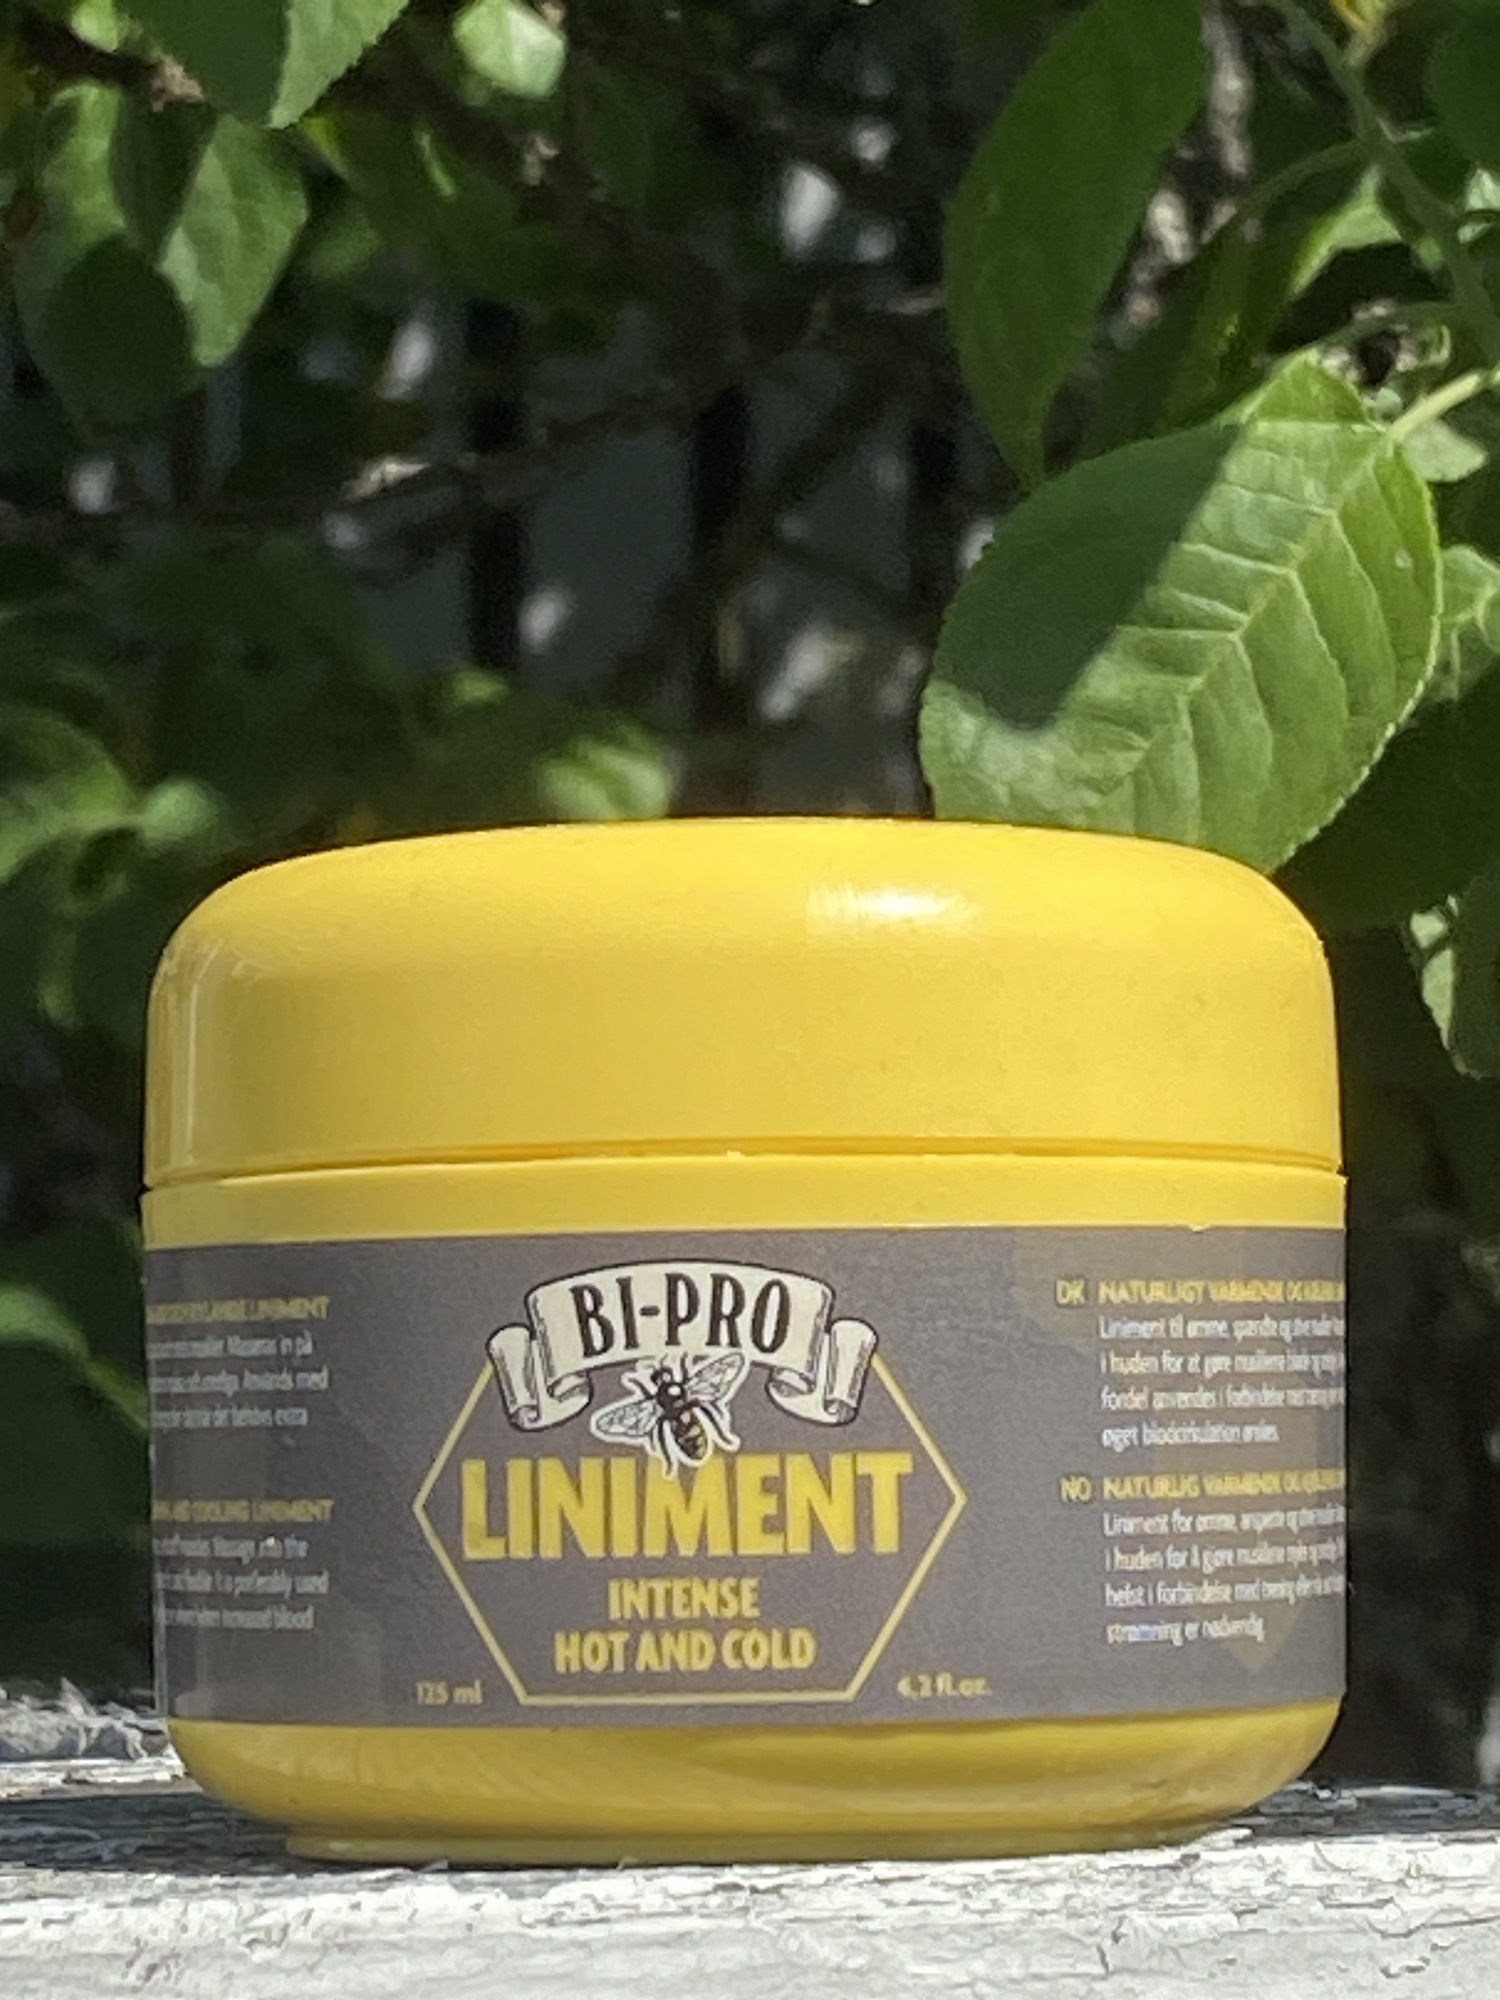 Bipro liniment intense hot & cold